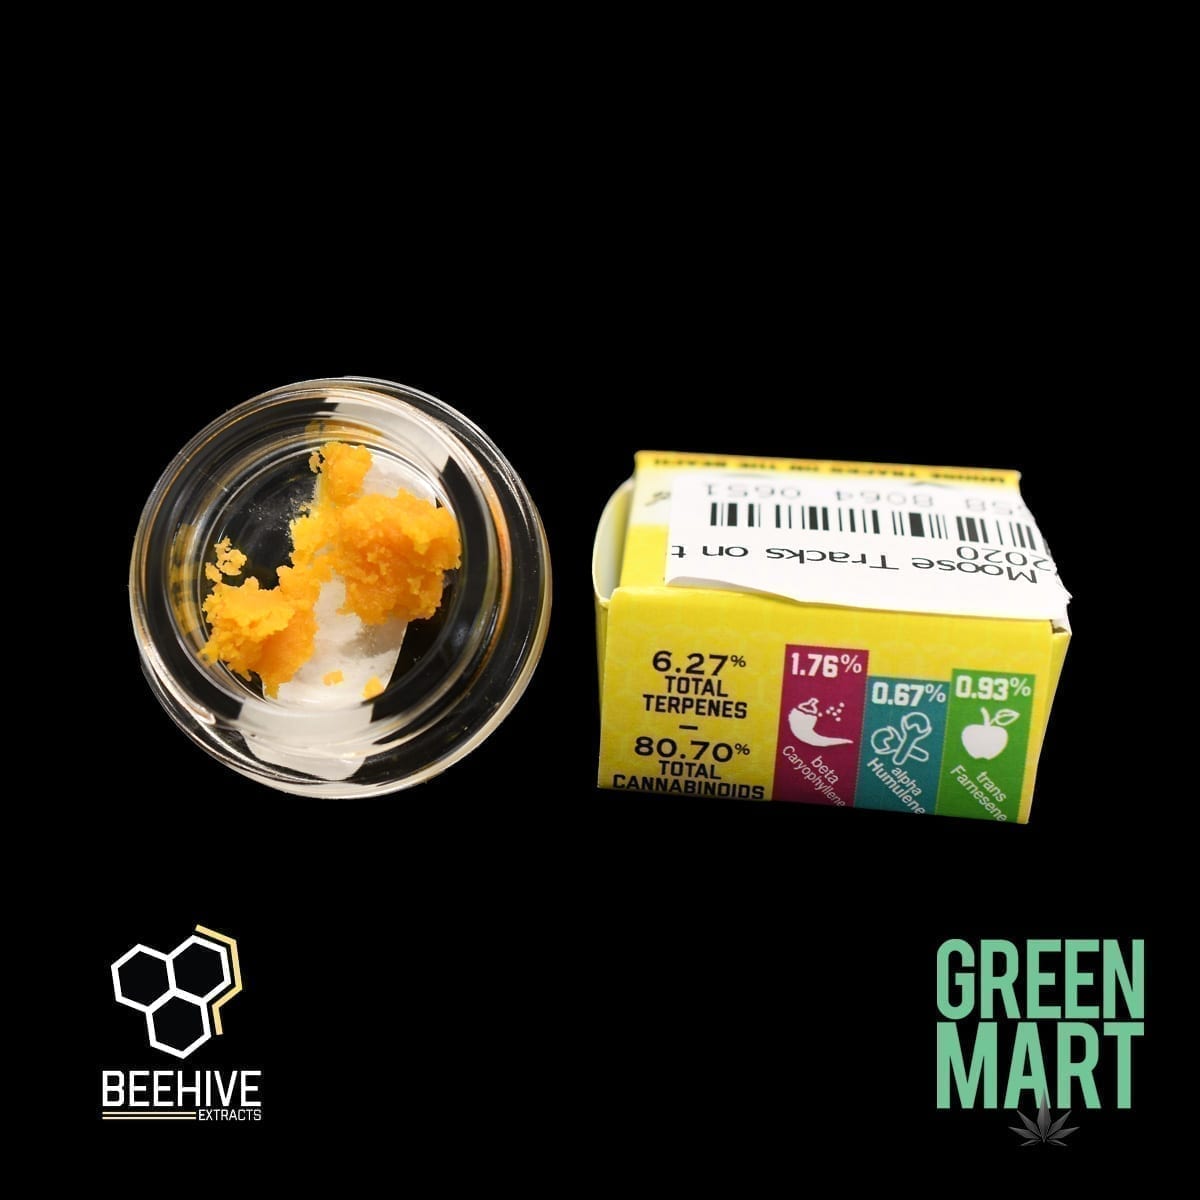 Beehive Extracts - Moose Tracks on the Beach Terps